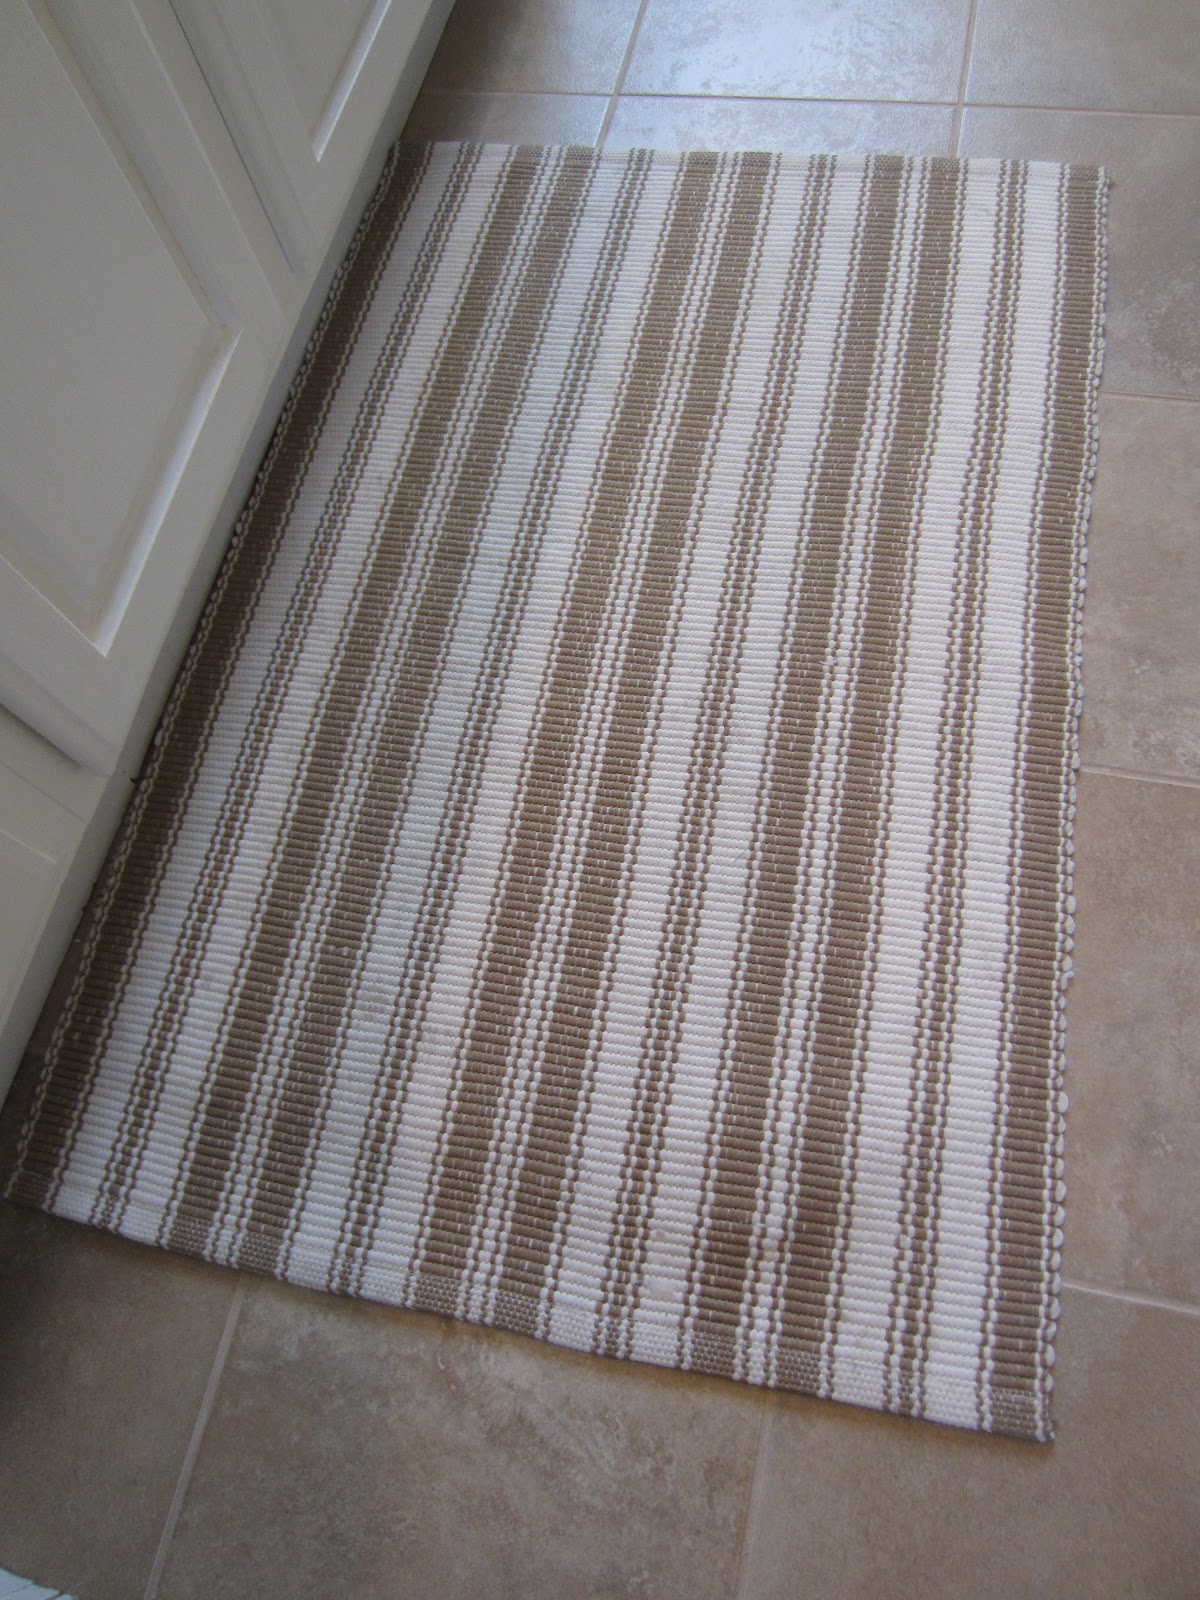 Dash and Albert Striped rug - an easy way to clean!